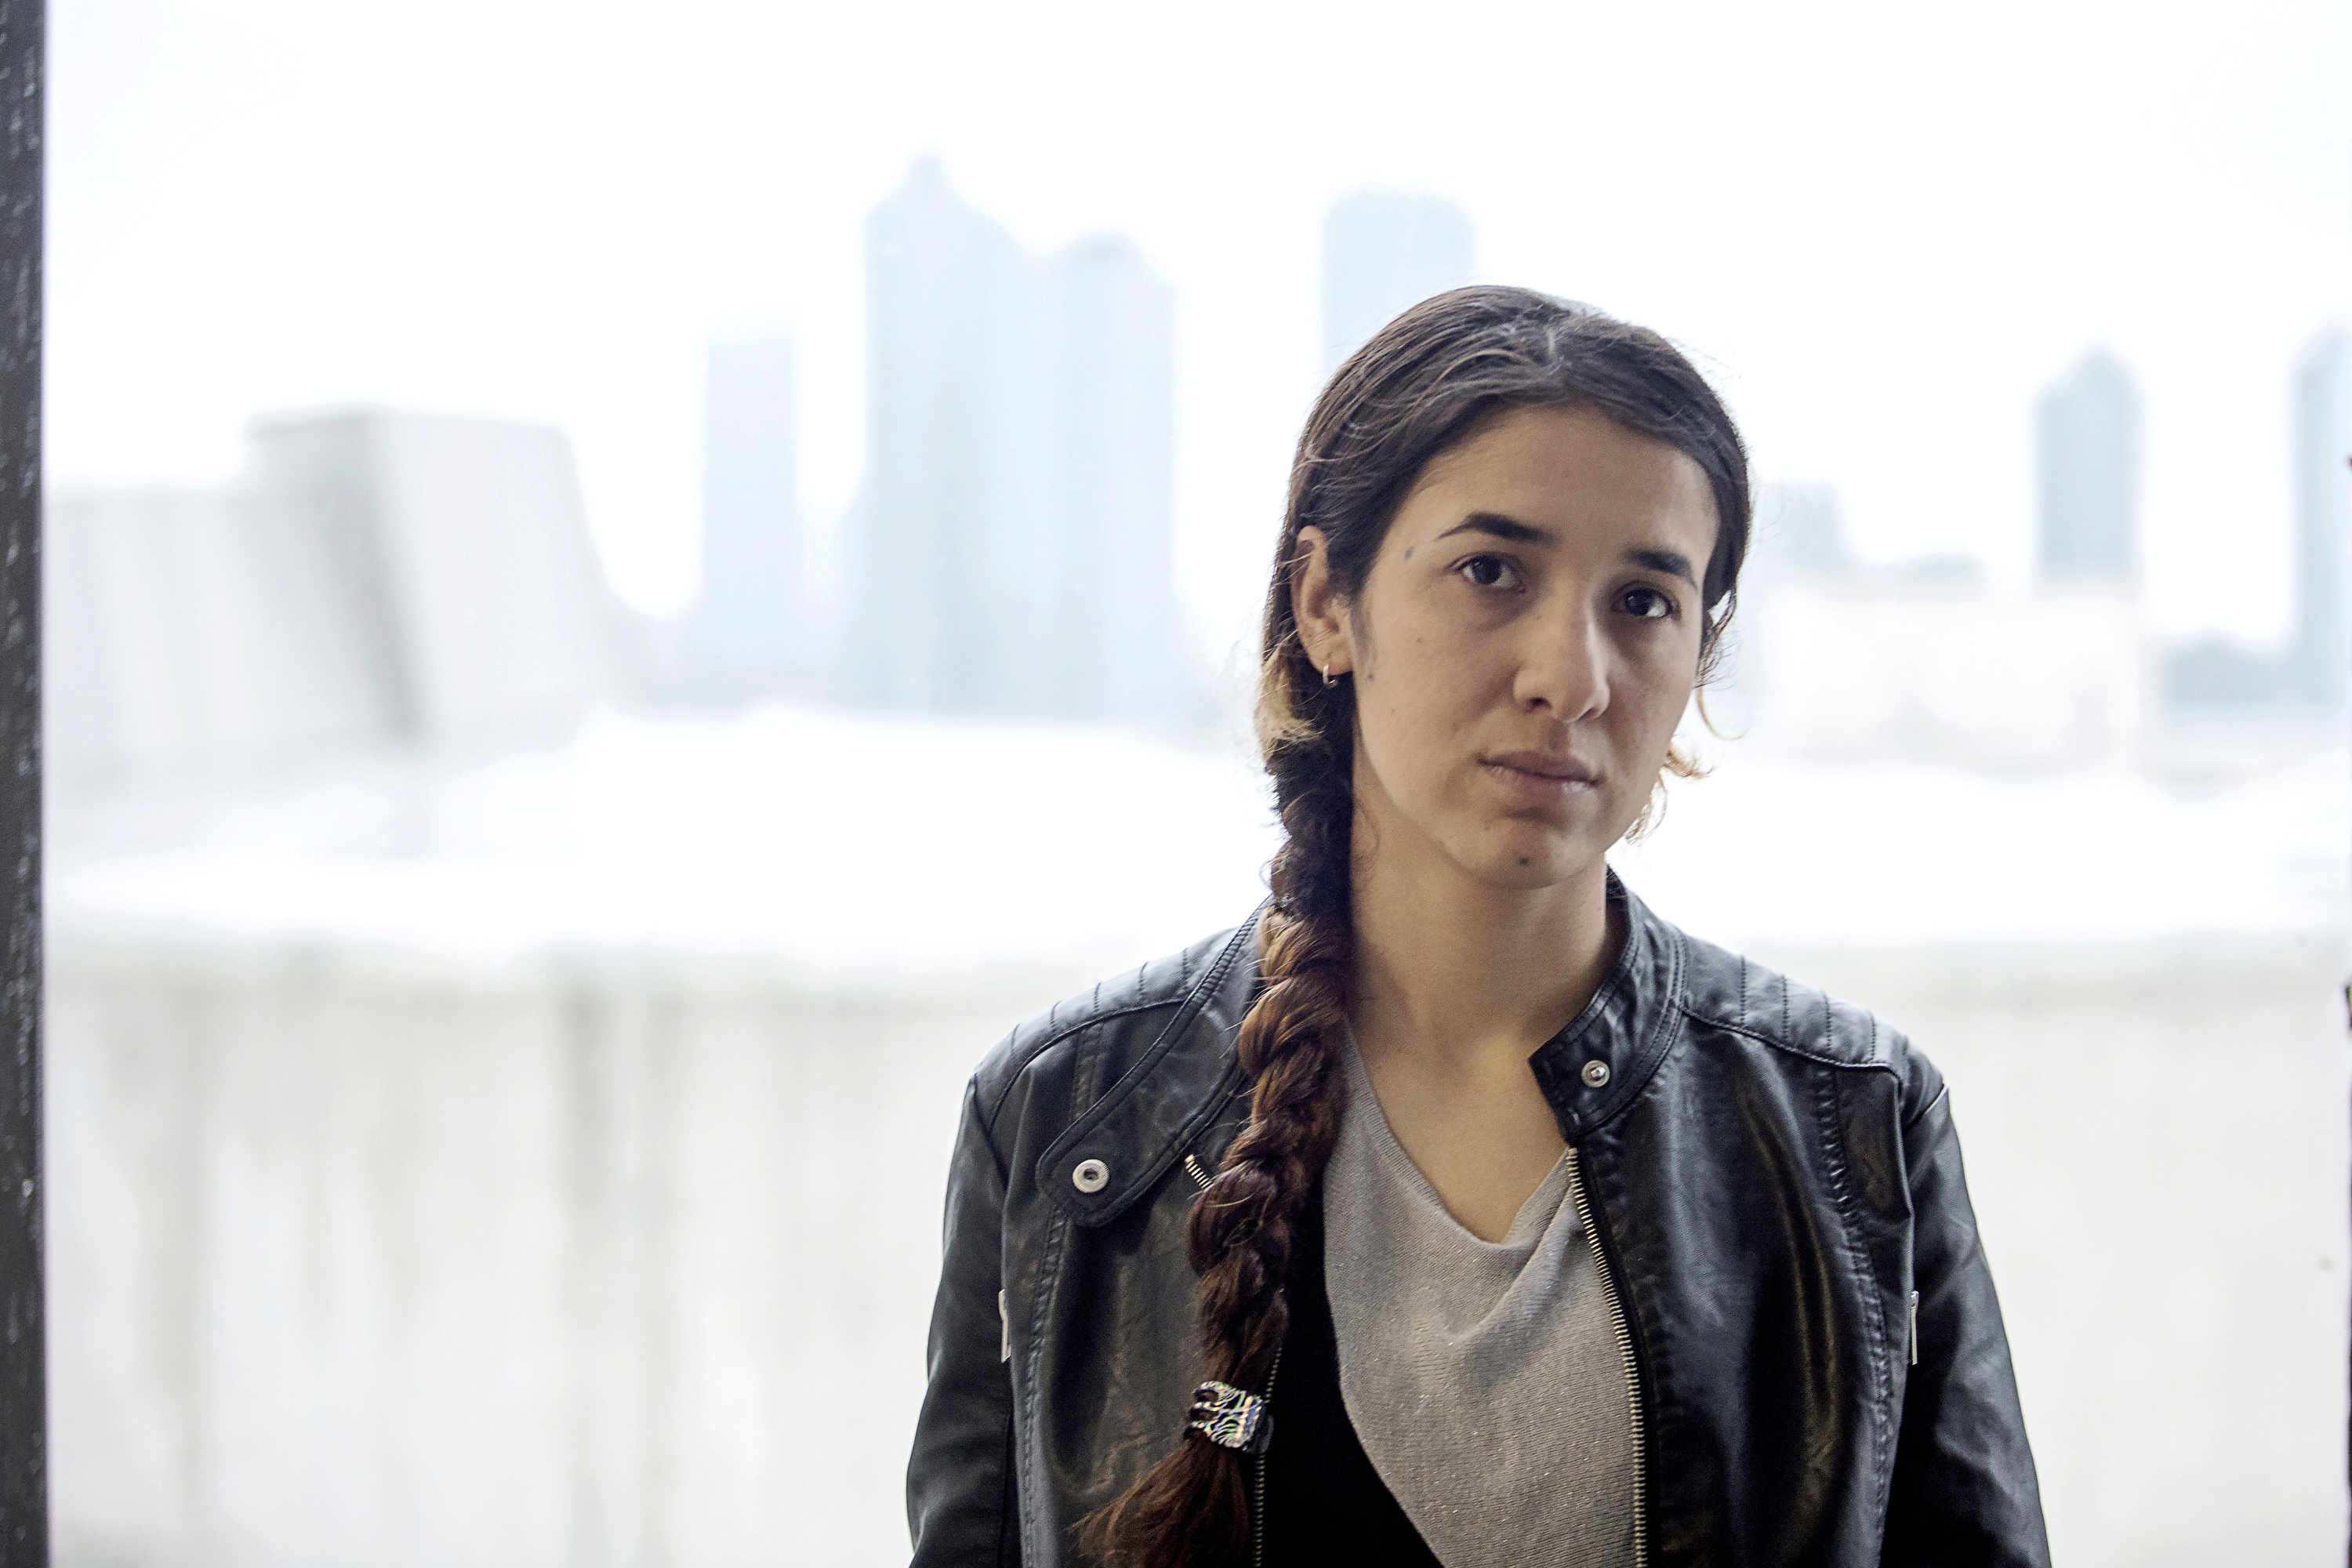 Nadia, a young Iraqi Yezidi who was abducted into slavery by members of ISIS, is photographed in the U.S. (Kirsten Luce for TIME)